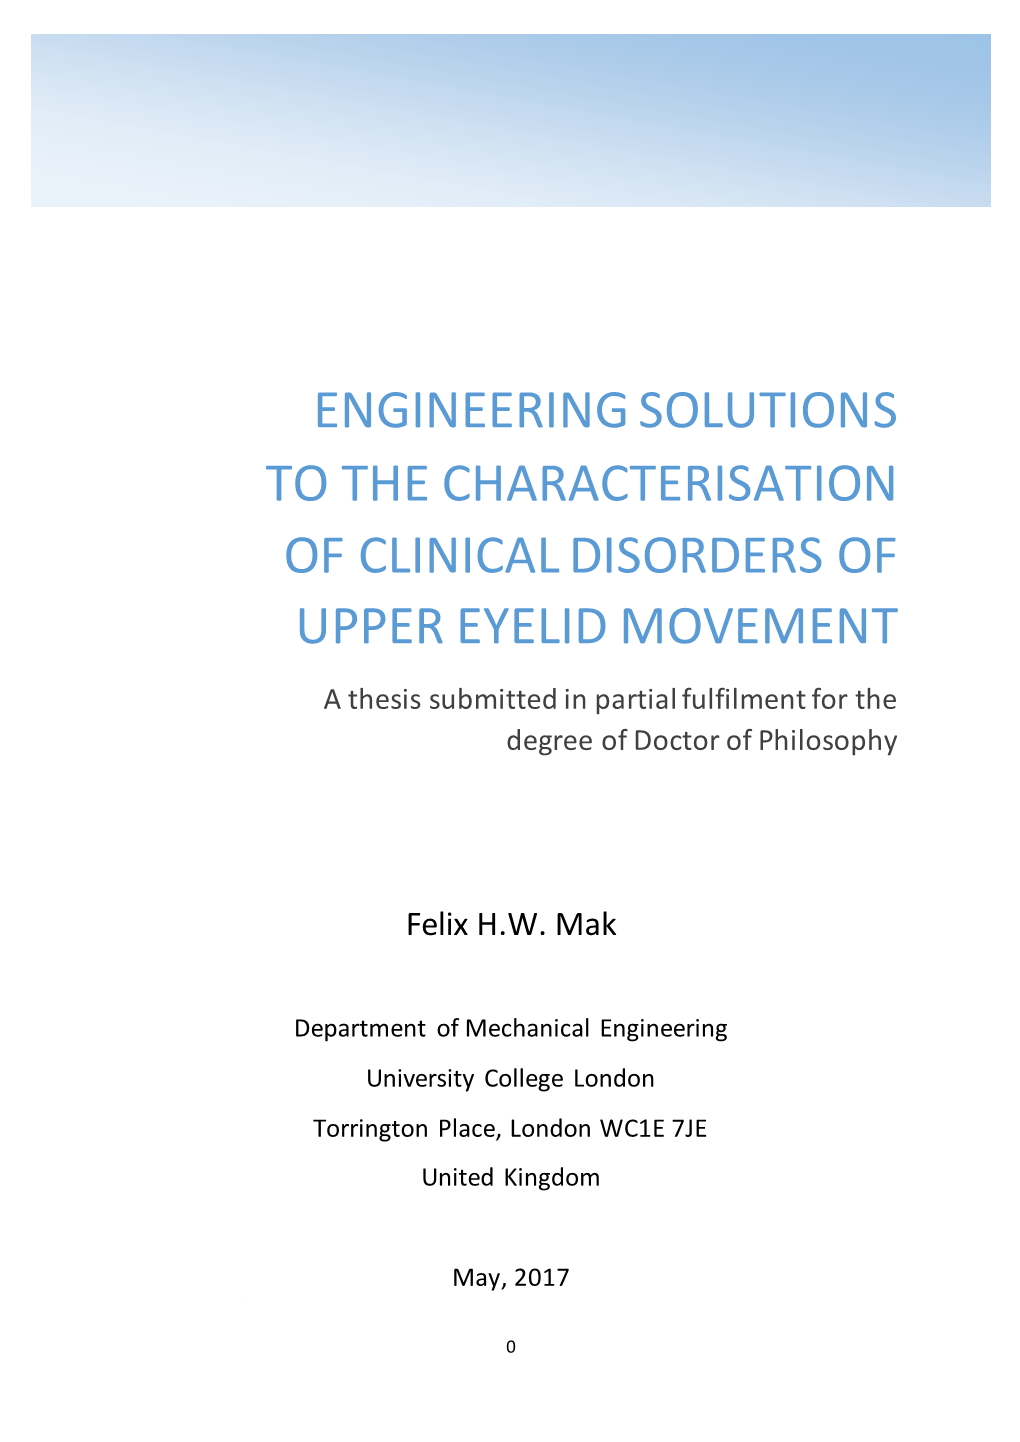 Engineering Solutions to the Characterisation of Clinical Disorders of Upper Eyelid Movement